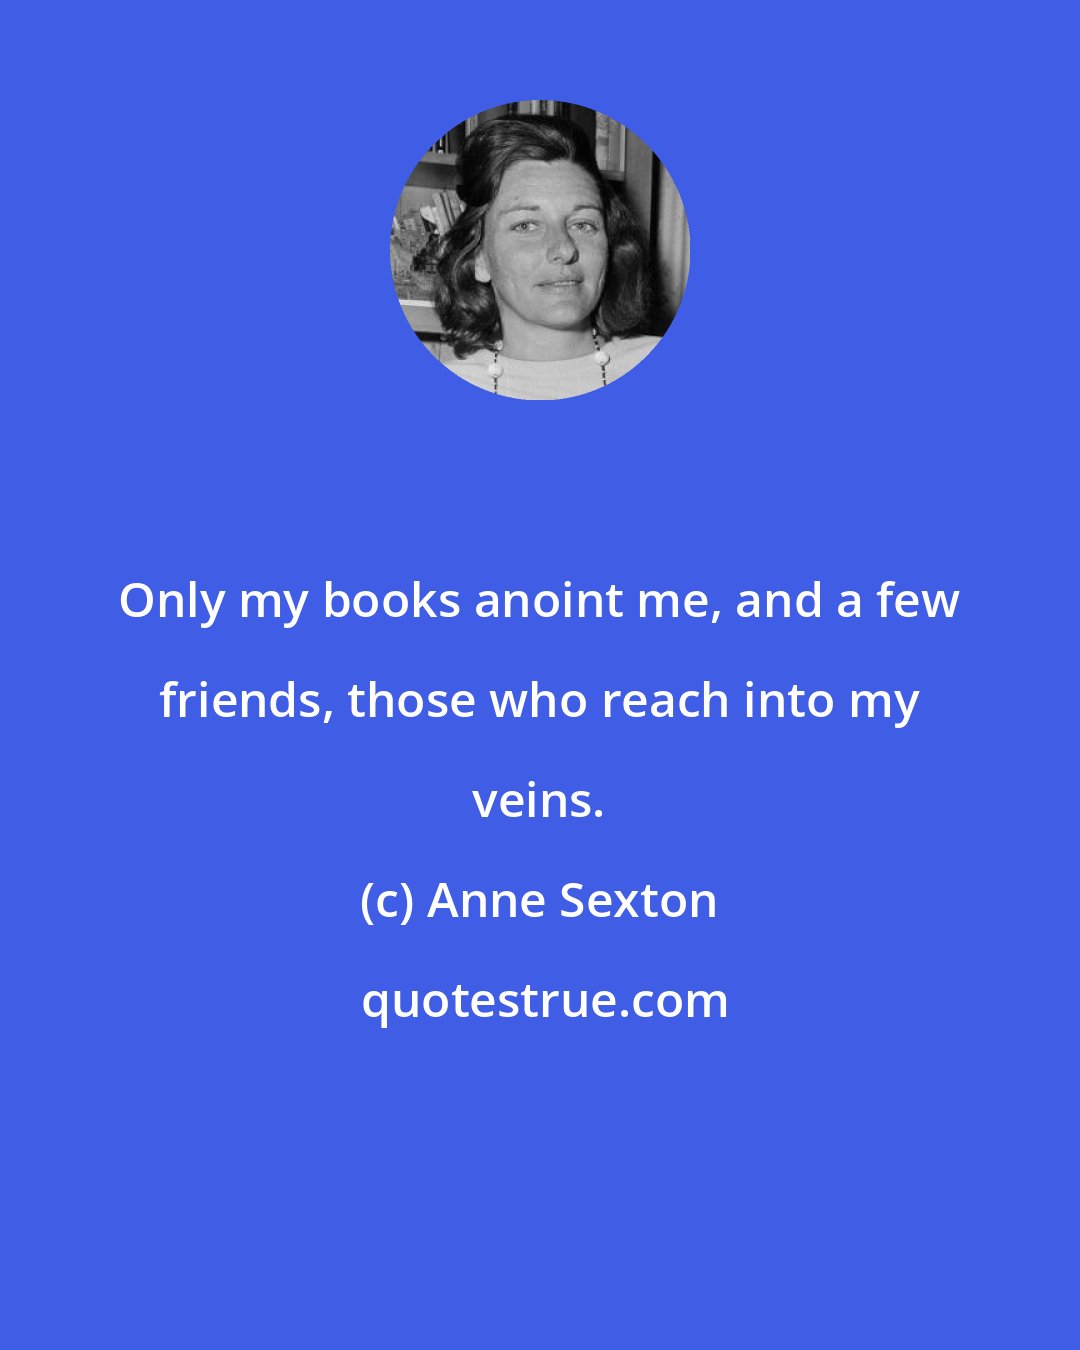 Anne Sexton: Only my books anoint me, and a few friends, those who reach into my veins.